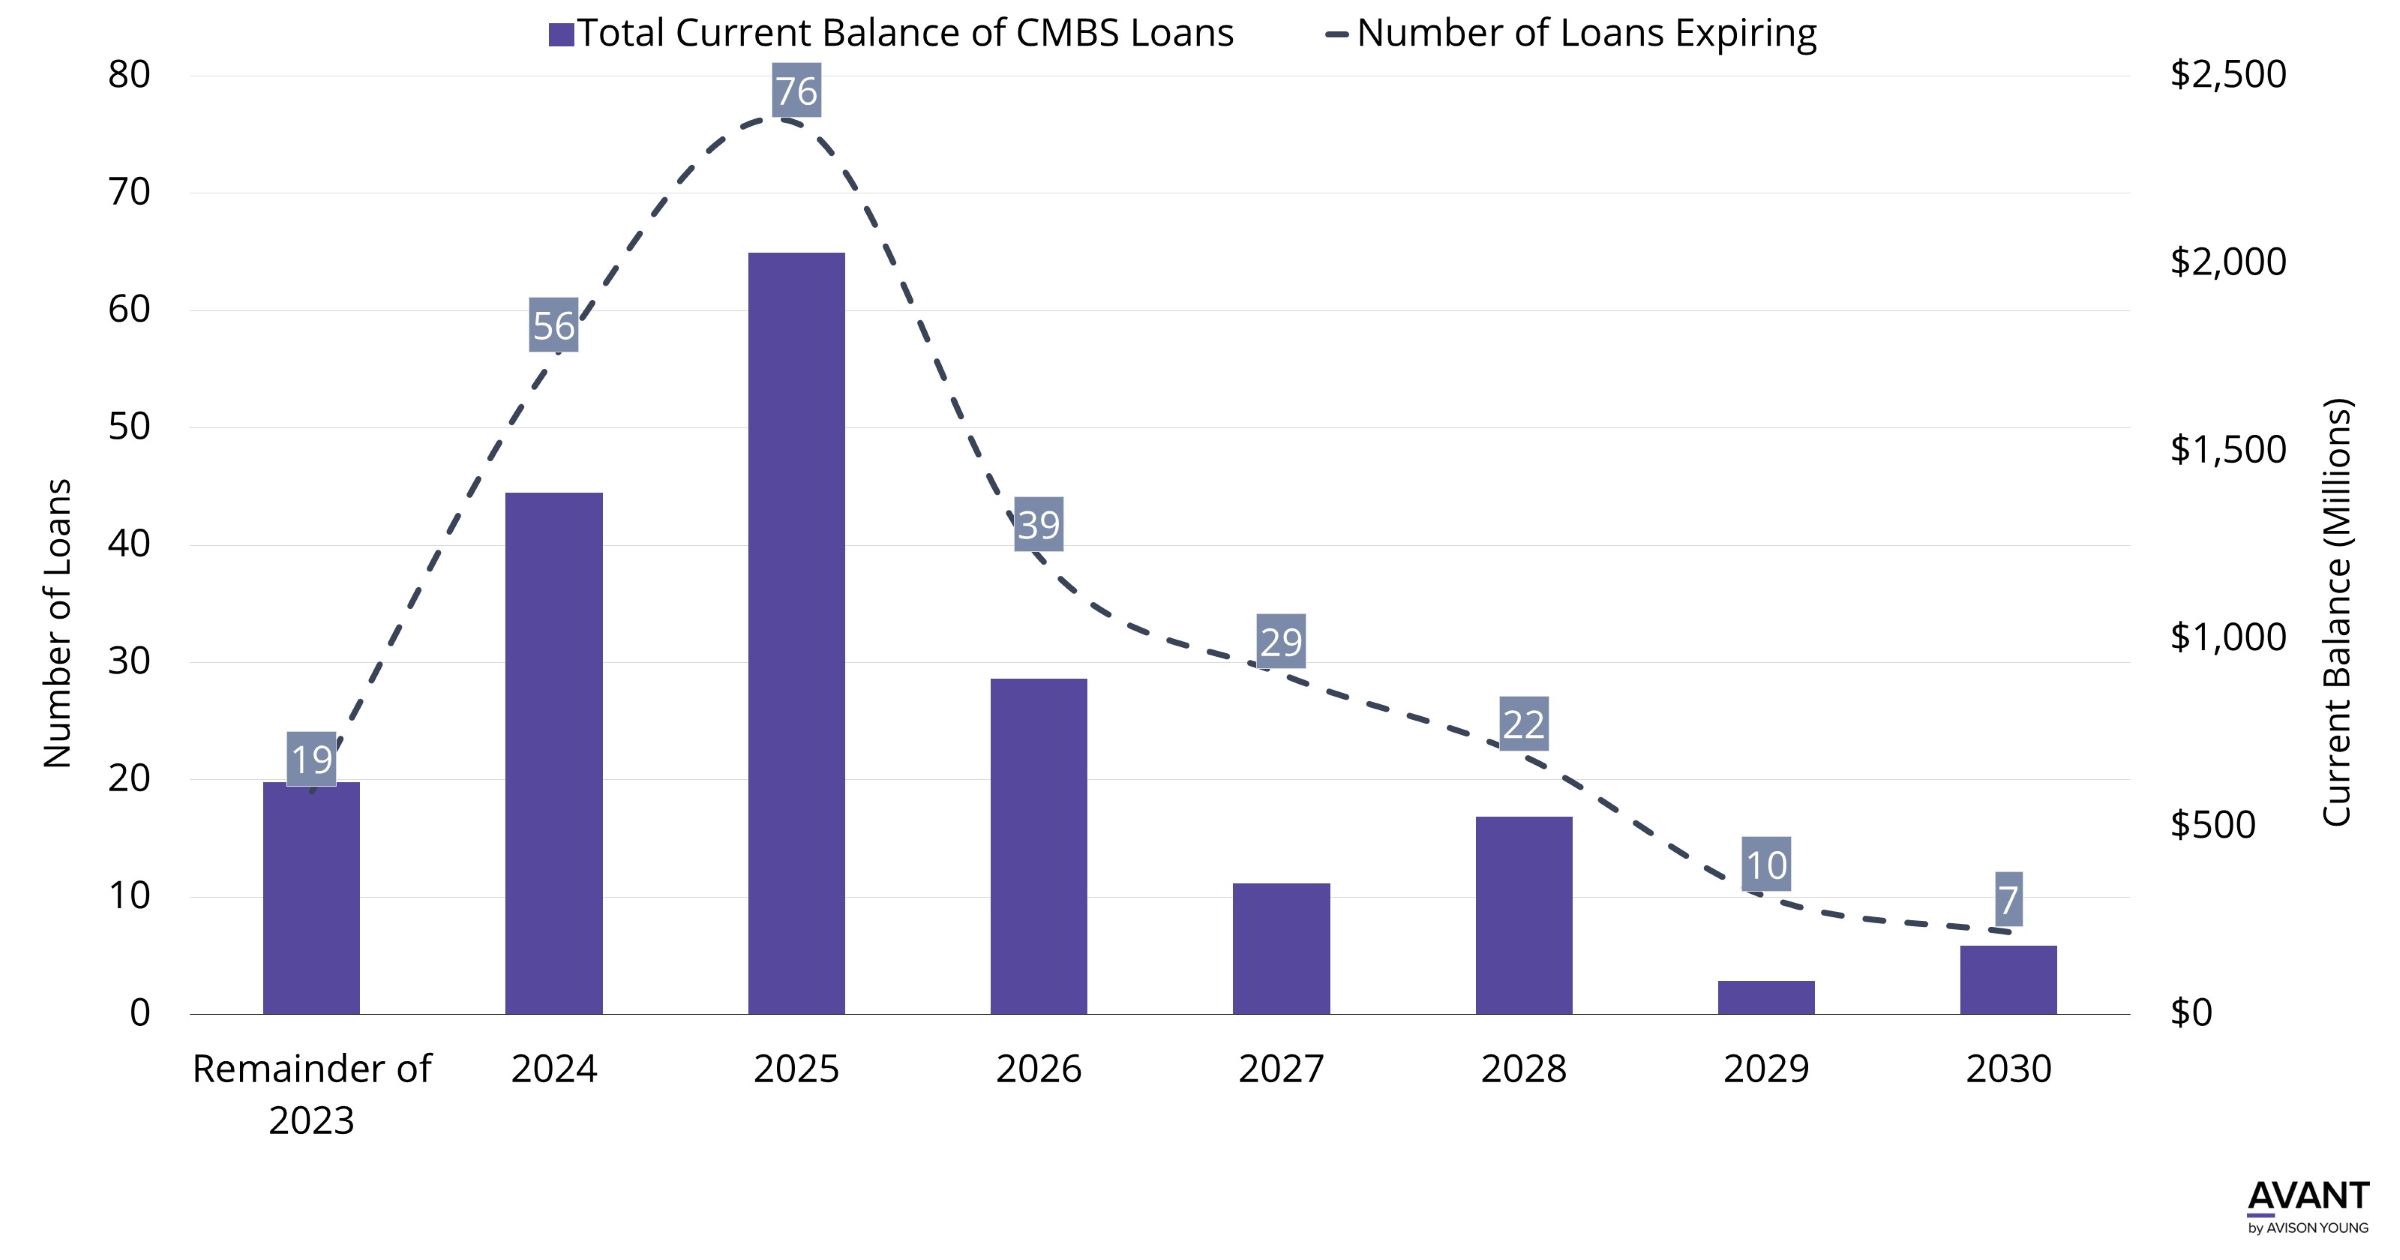 Chart showing total current balance of CMBS Loans and the number of loans expiring